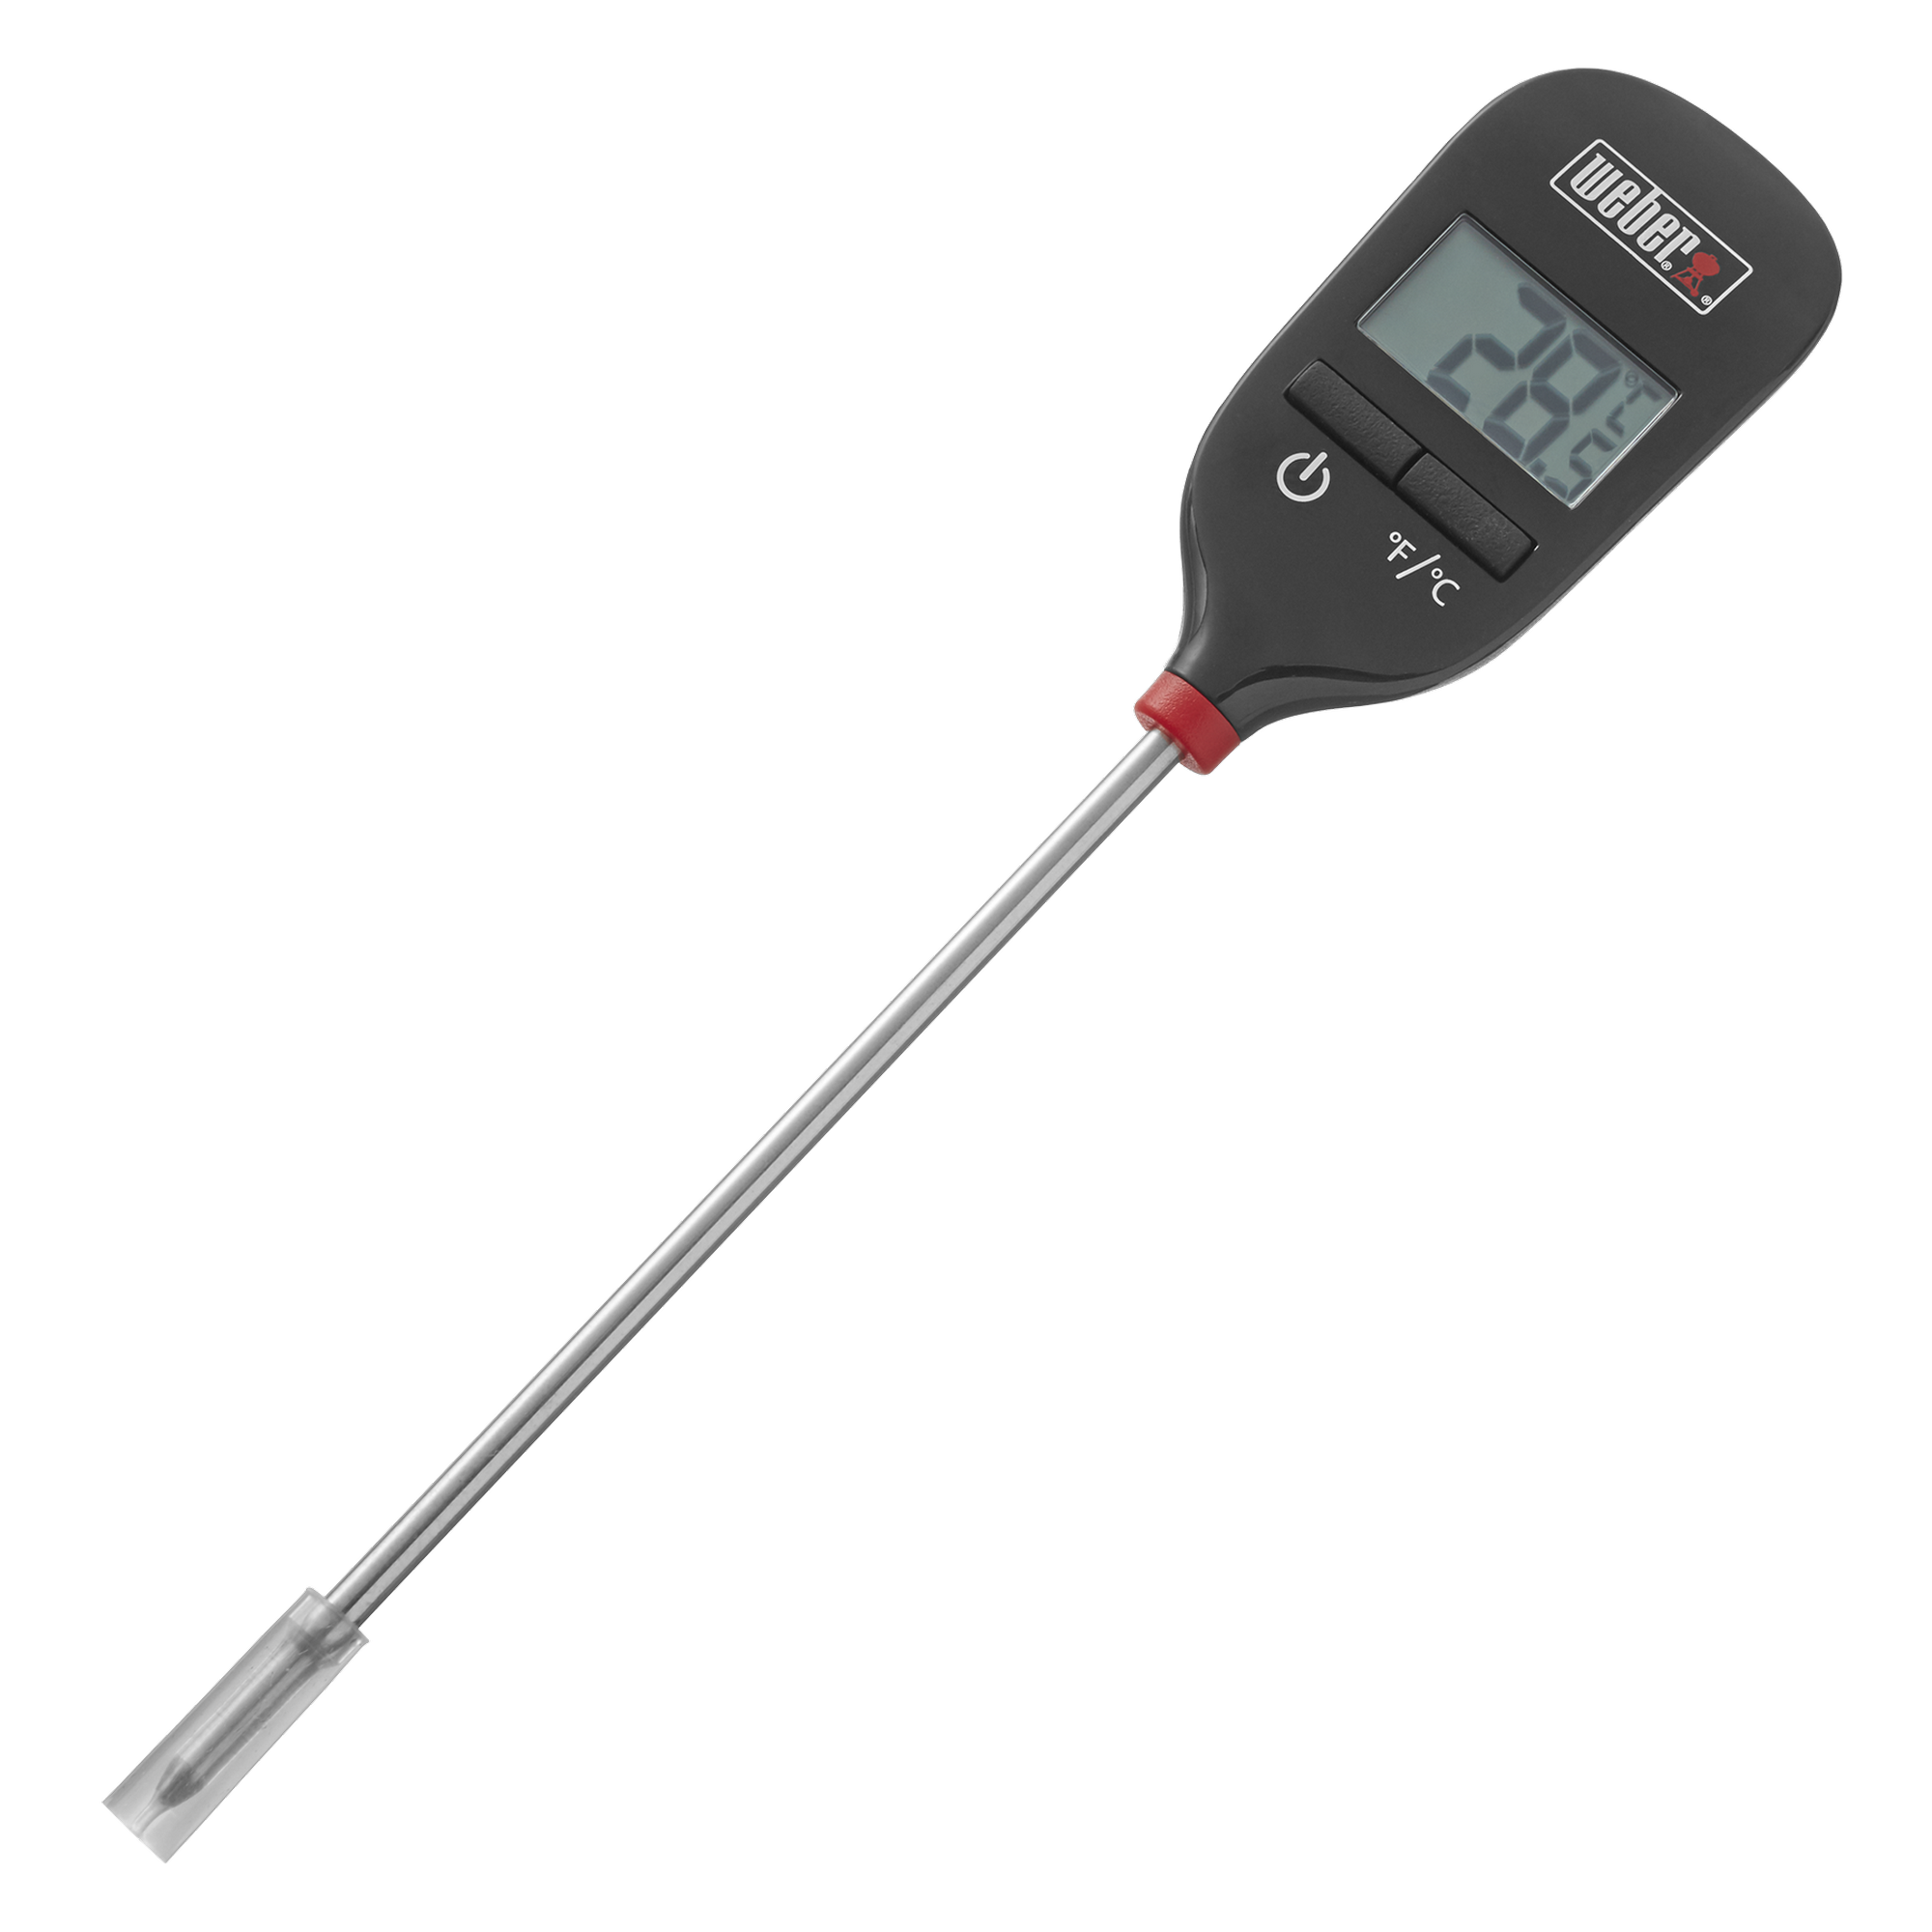 Digital-Thermometer mit Sofortanzeige + product picture